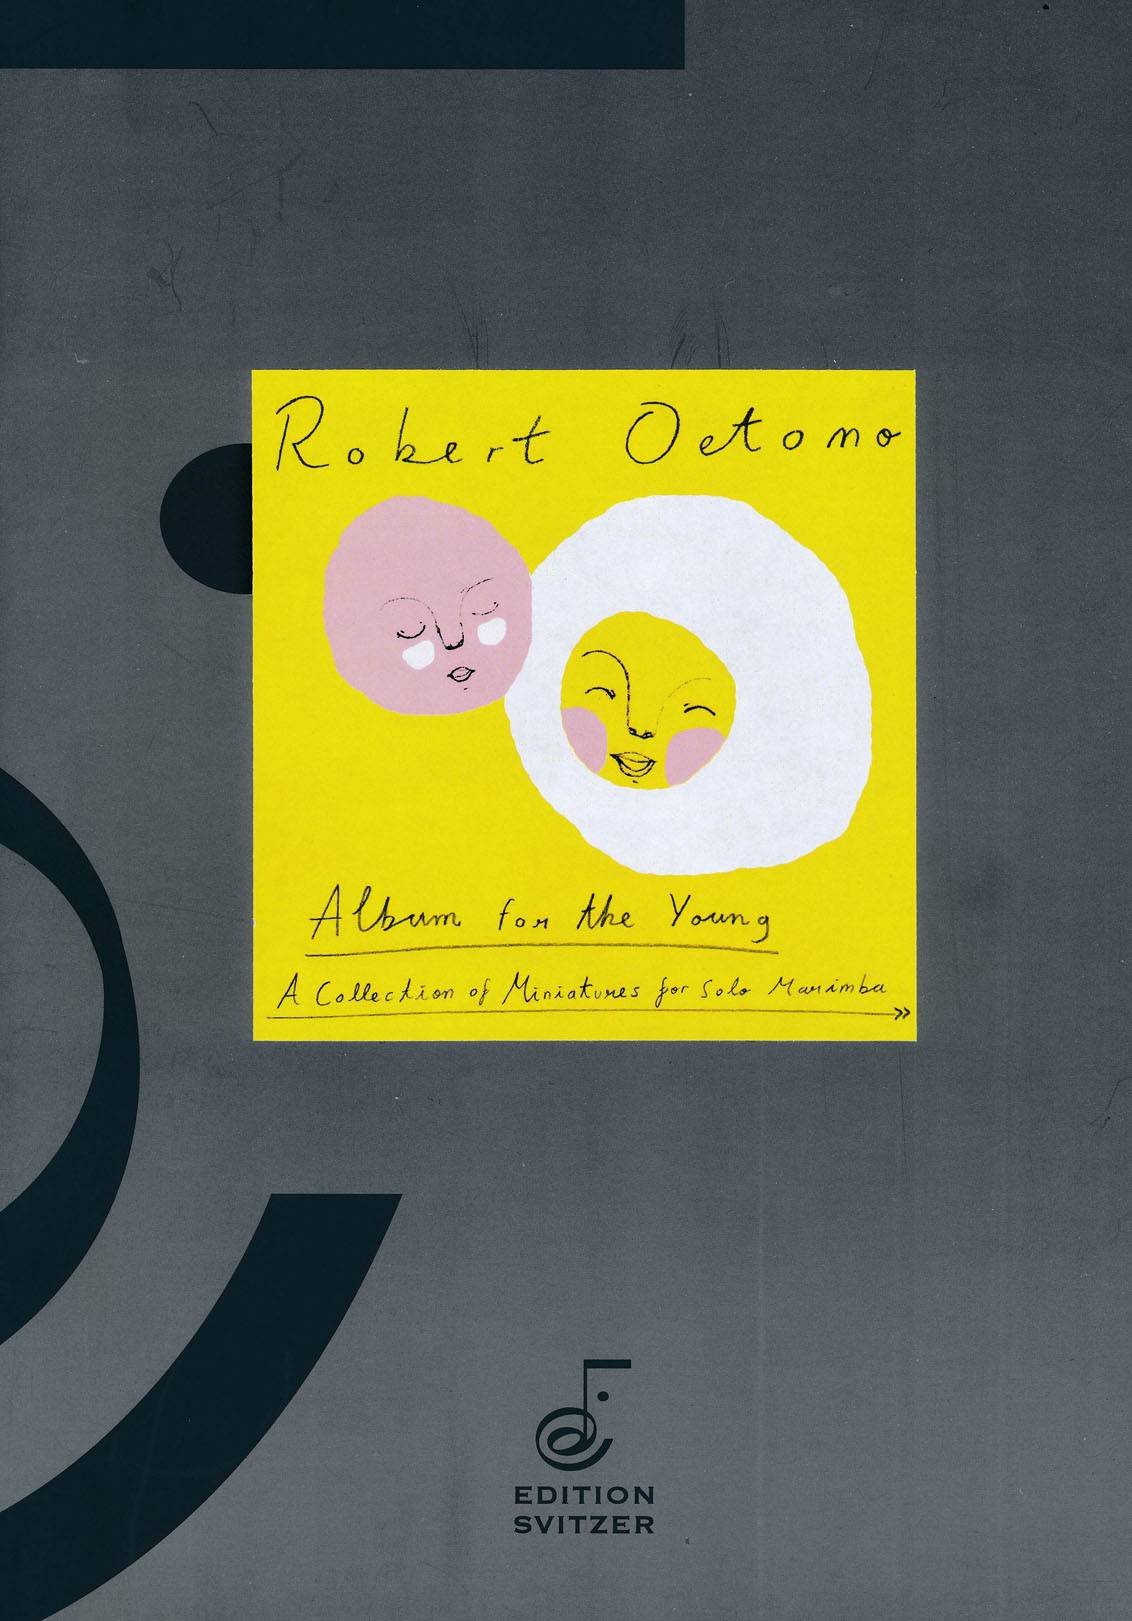 Album for the Young by Robert Oetomo